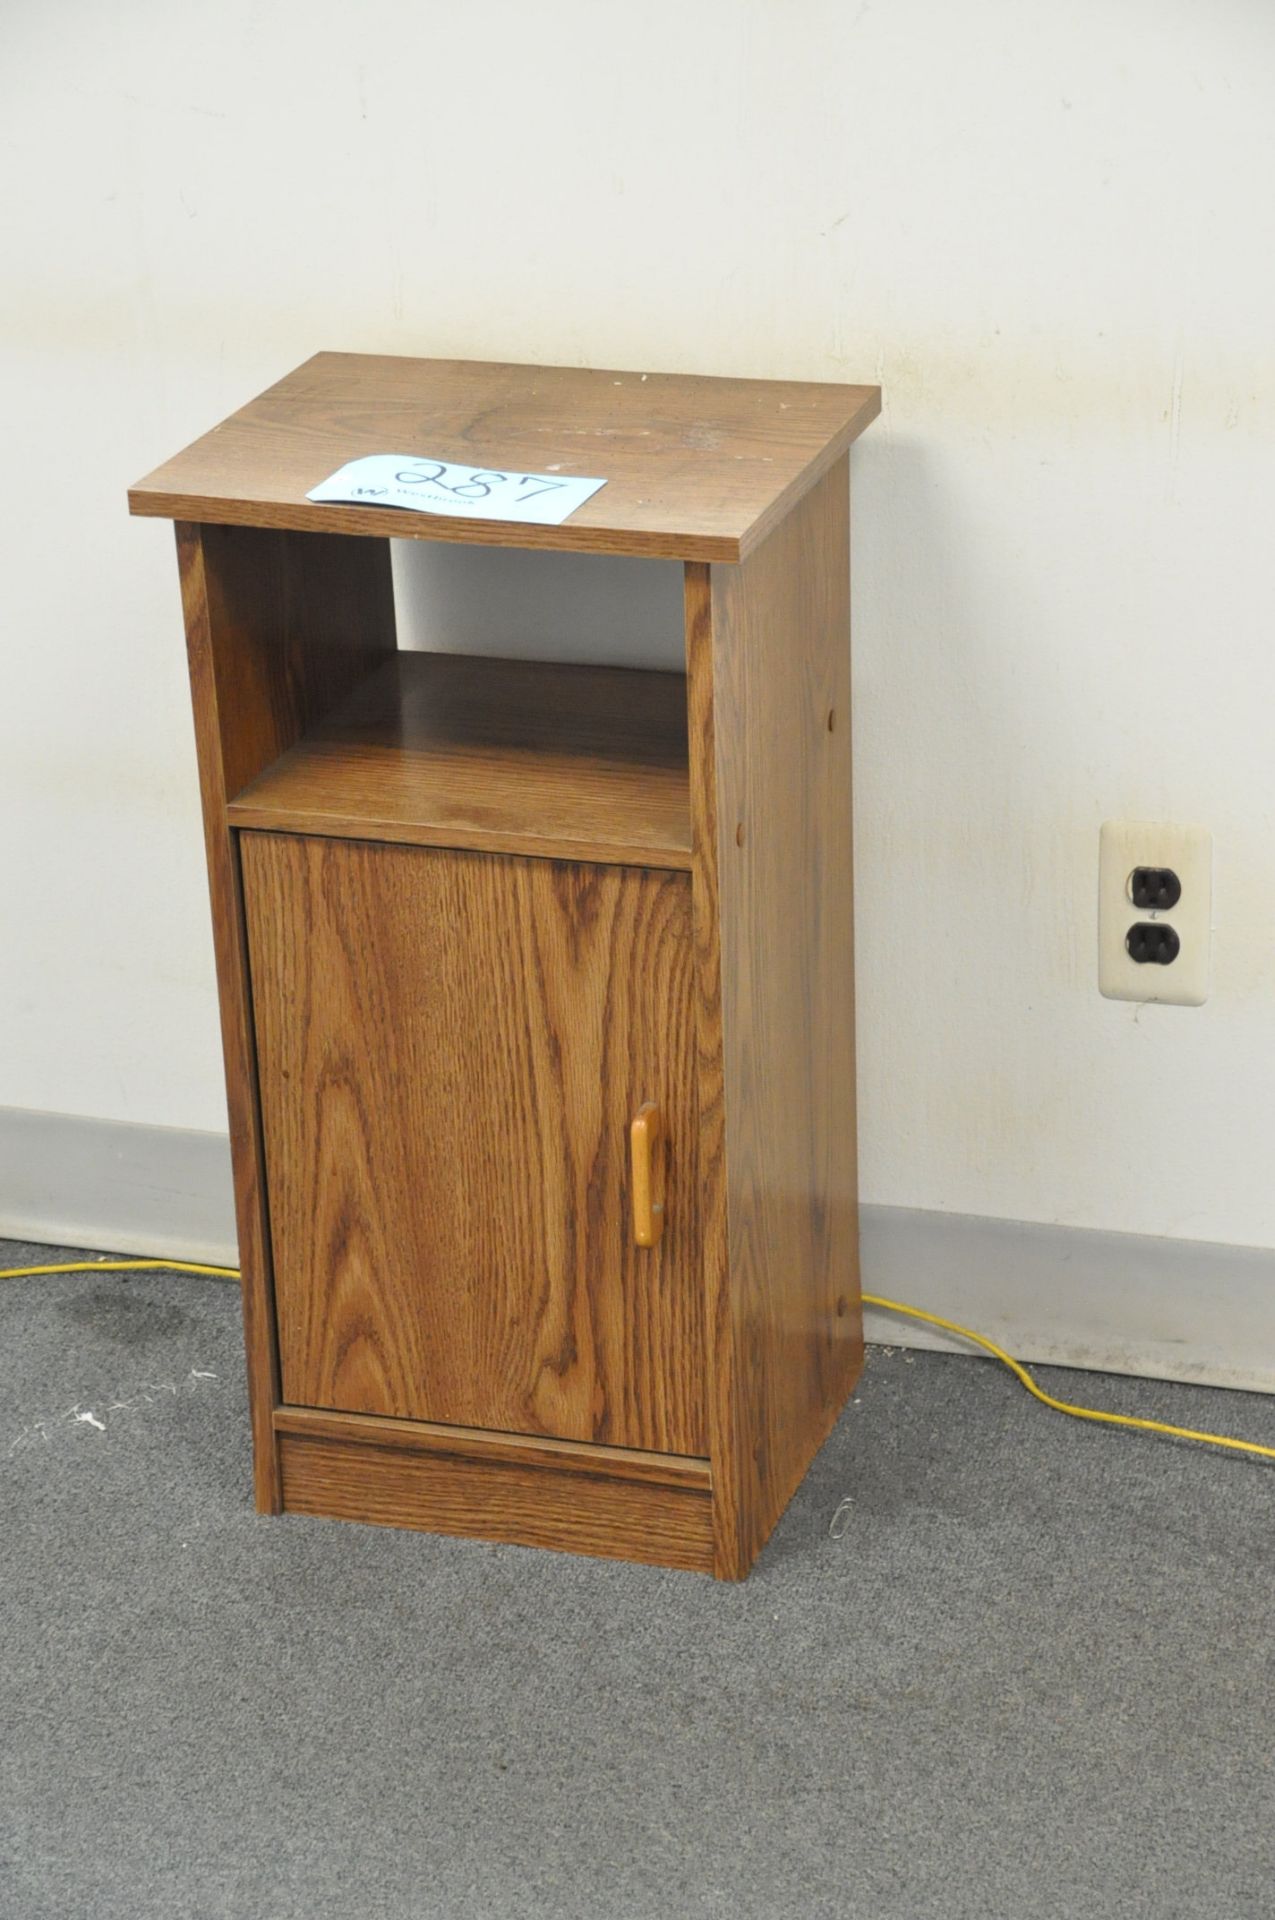 Lot-Desk with 2-Drawer Lateral File Cabinet 4-Drawer Vertical File Cabinet in (1) Office - Image 3 of 3